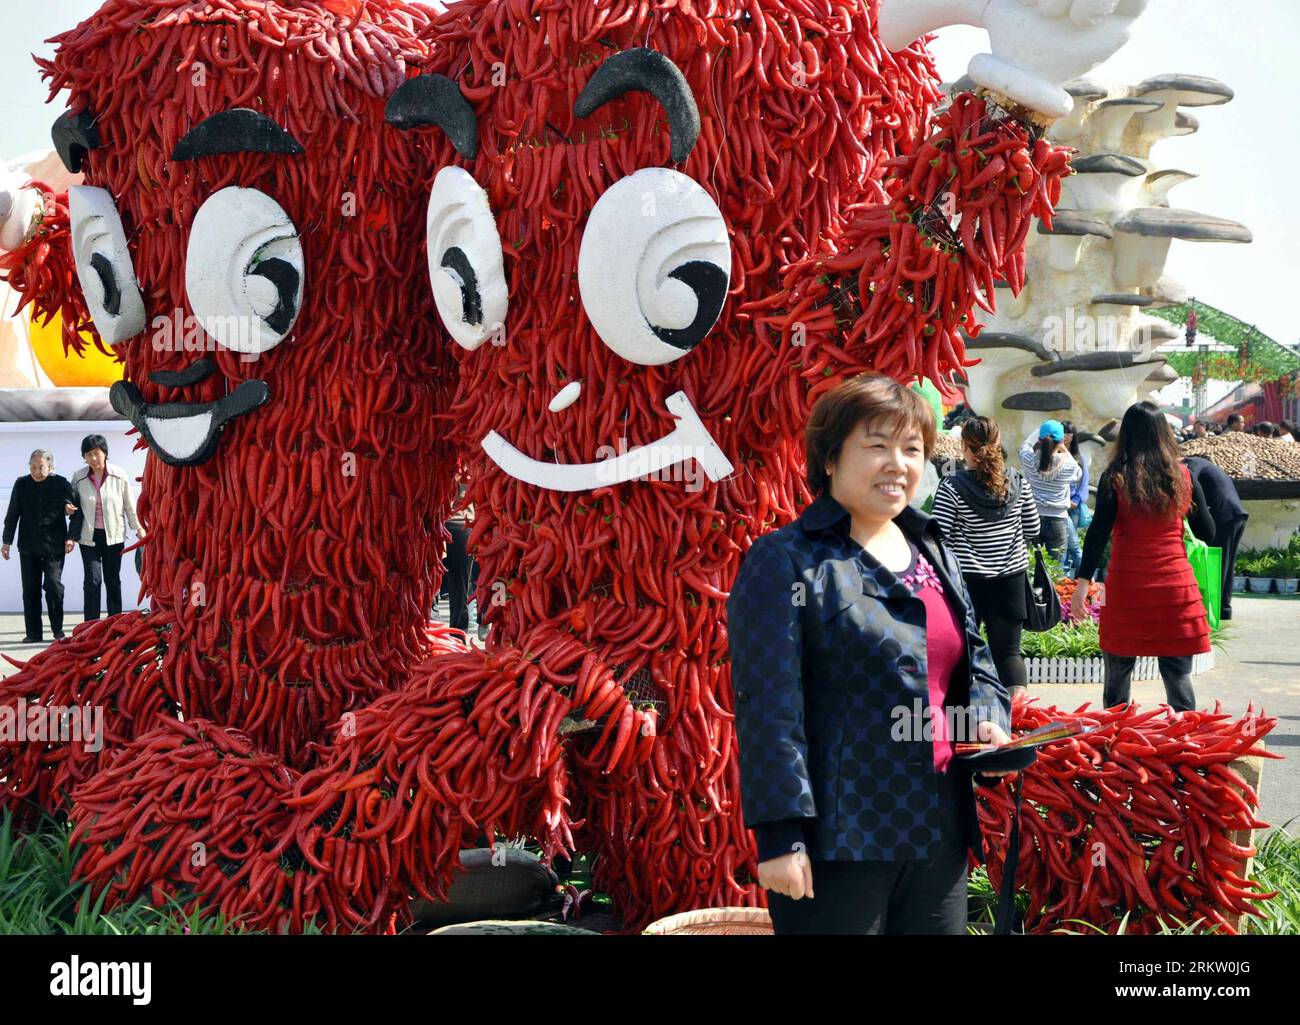 Bildnummer: 58582305  Datum: 12.10.2012  Copyright: imago/Xinhua (121012) -- XINJIANG, Oct. 12, 2012 (Xinhua) -- A visitor poses for photo beside a mascot piled up by peppers during an exhibition of agricultural production in Xinjiang County, north China s Shanxi Province. Oct. 12, 2012. Xinjiang County has embraced a good harvest this year. (Xinhua/Wang Feihang) (mp) CHINA-SHANXI-XINJIANG-HARVEST (CN) PUBLICATIONxNOTxINxCHN Wirtschaft Messe Landwirtschaft Agrarmesse Landwirtschaftsmesse kurios x0x xmb 2012 quer      58582305 Date 12 10 2012 Copyright Imago XINHUA  Xinjiang OCT 12 2012 XINHUA Stock Photo